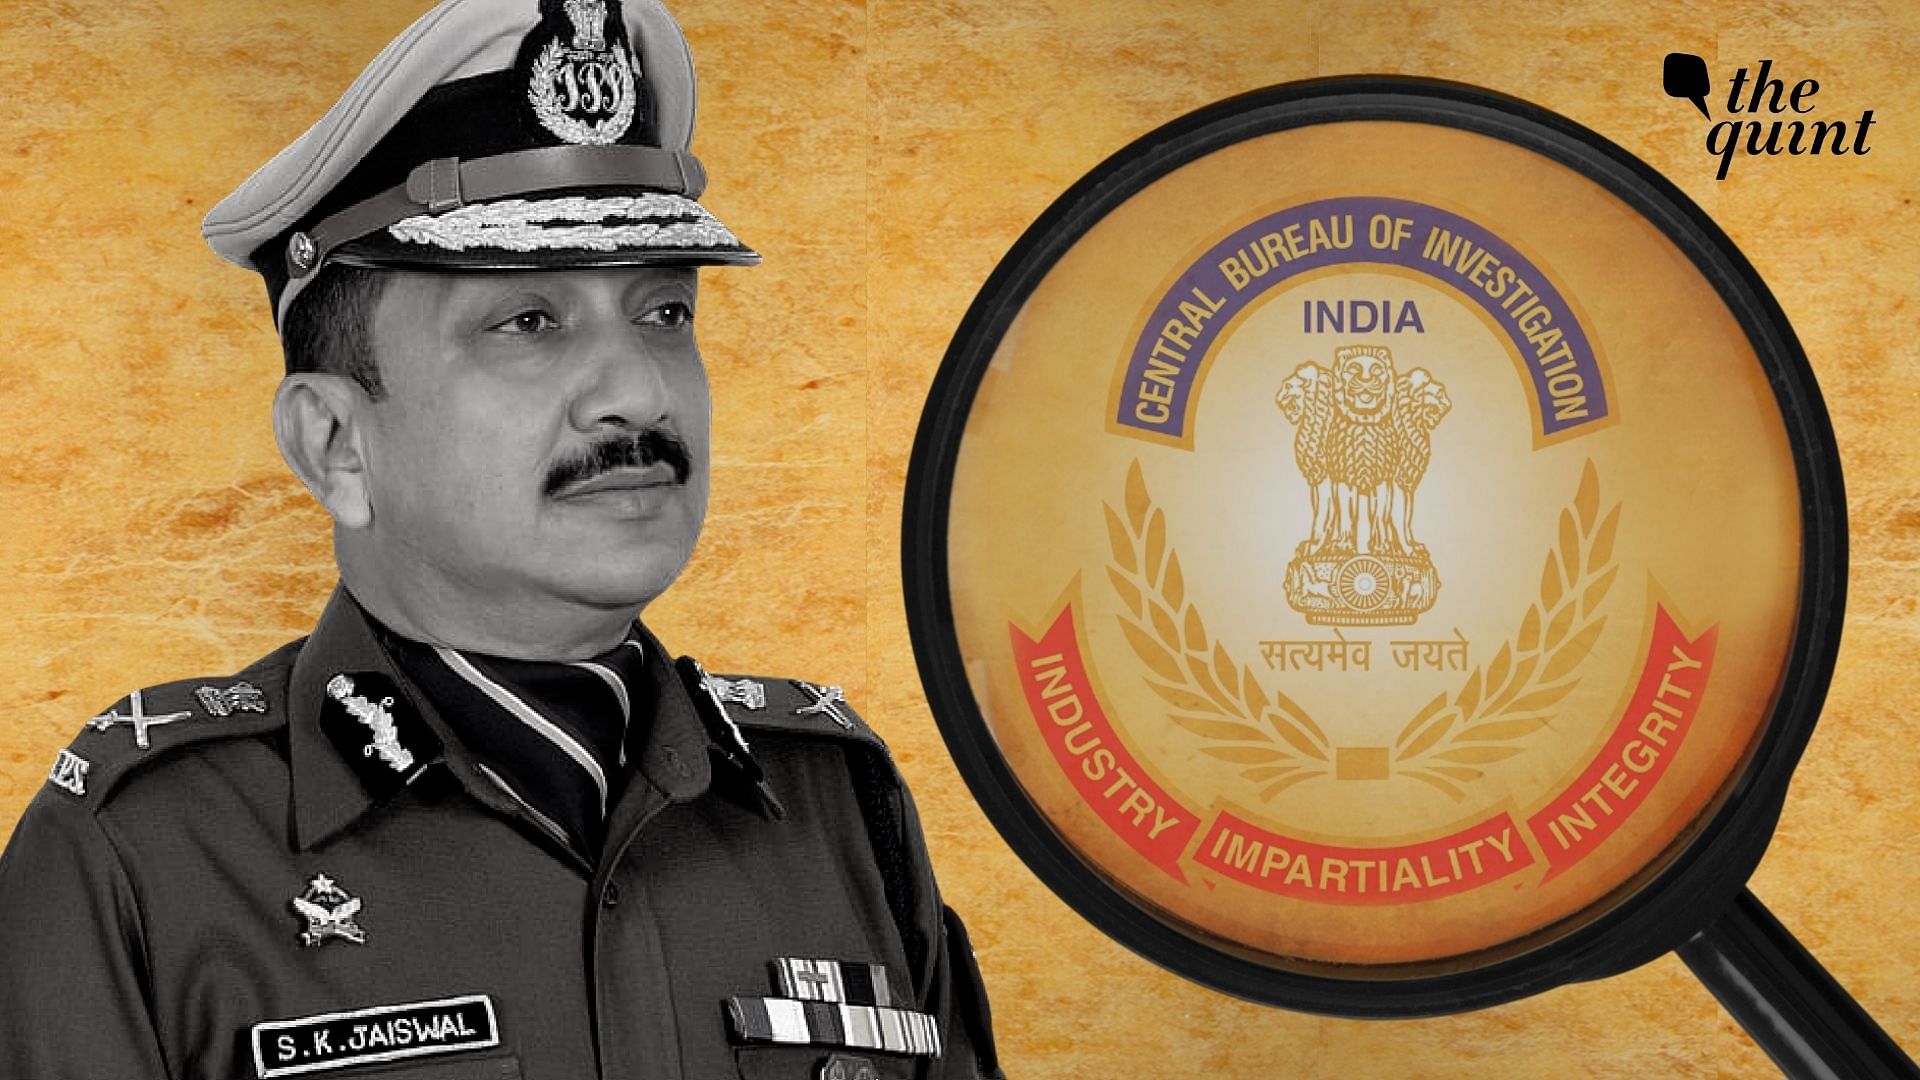 The Central Bureau of Investigation has its new director in Subodh Kumar Jaiswal.